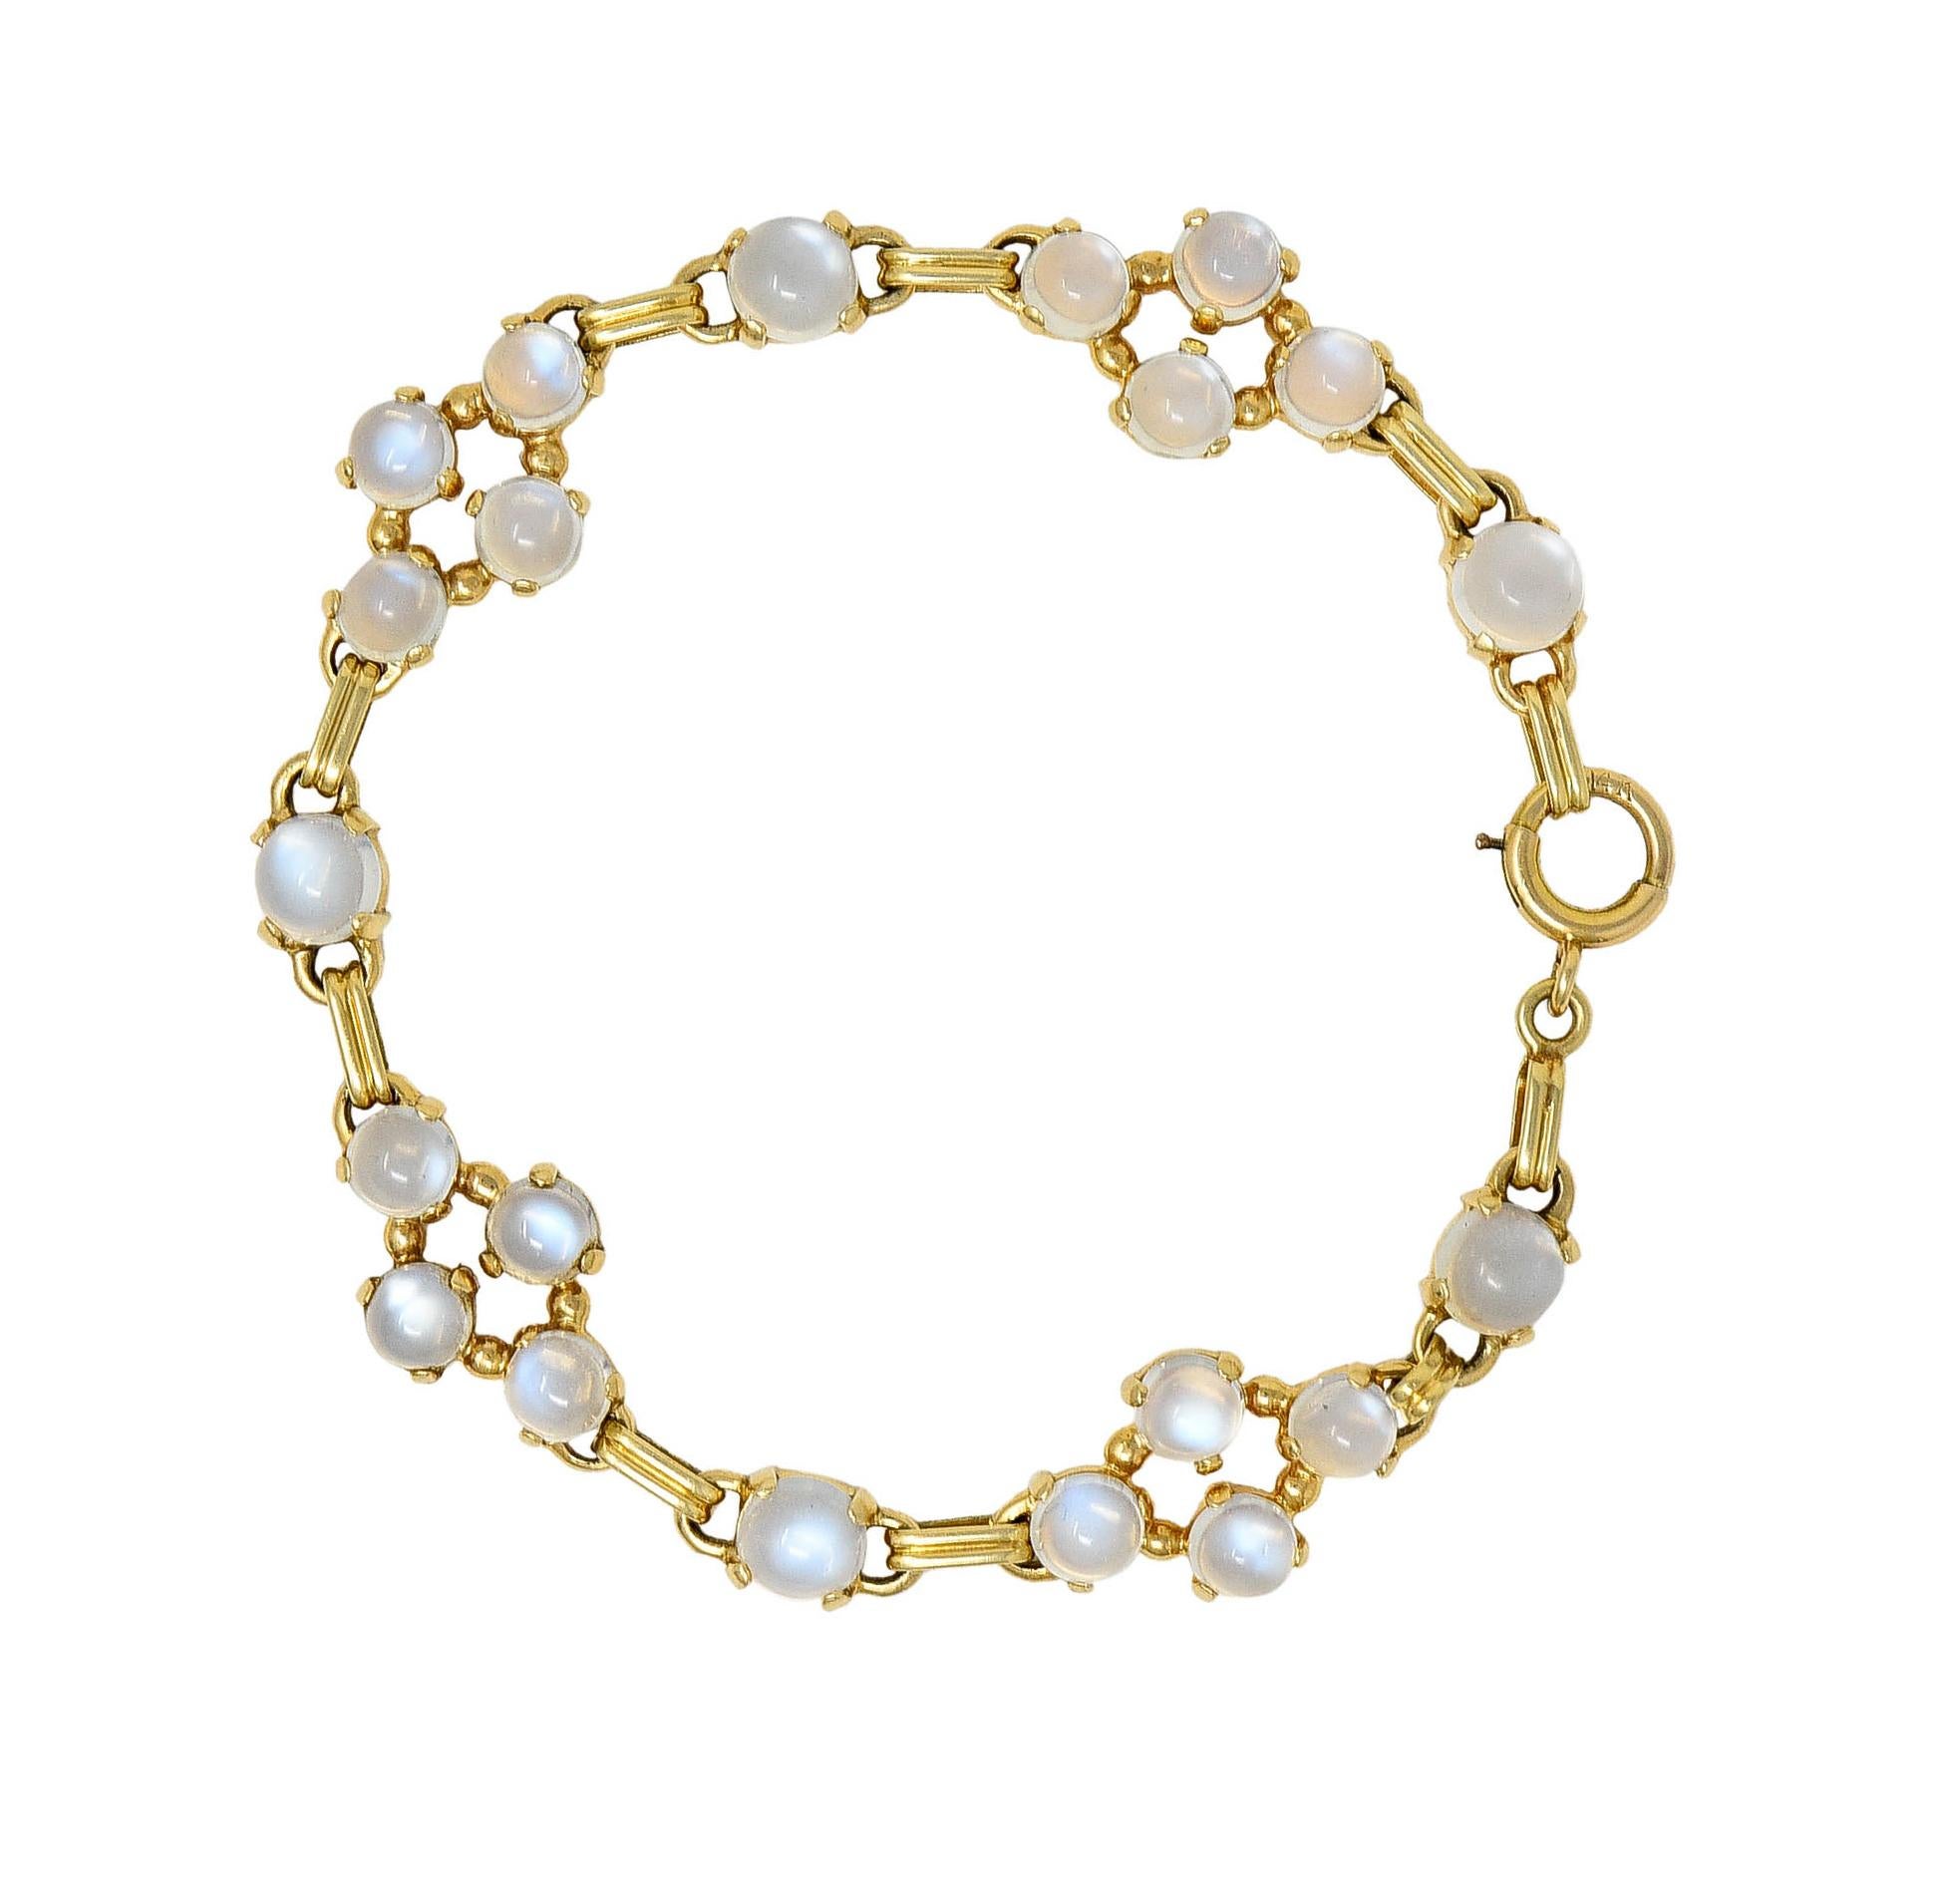 Link style bracelet features alternating moonstone cabochons and gold grooved links

Measuring from 6.0 mm to 5.0 mm in diameter - prong set

Moonstones are well matched and display prominent blue adularescence

Some arranged in engaging quatrefoil